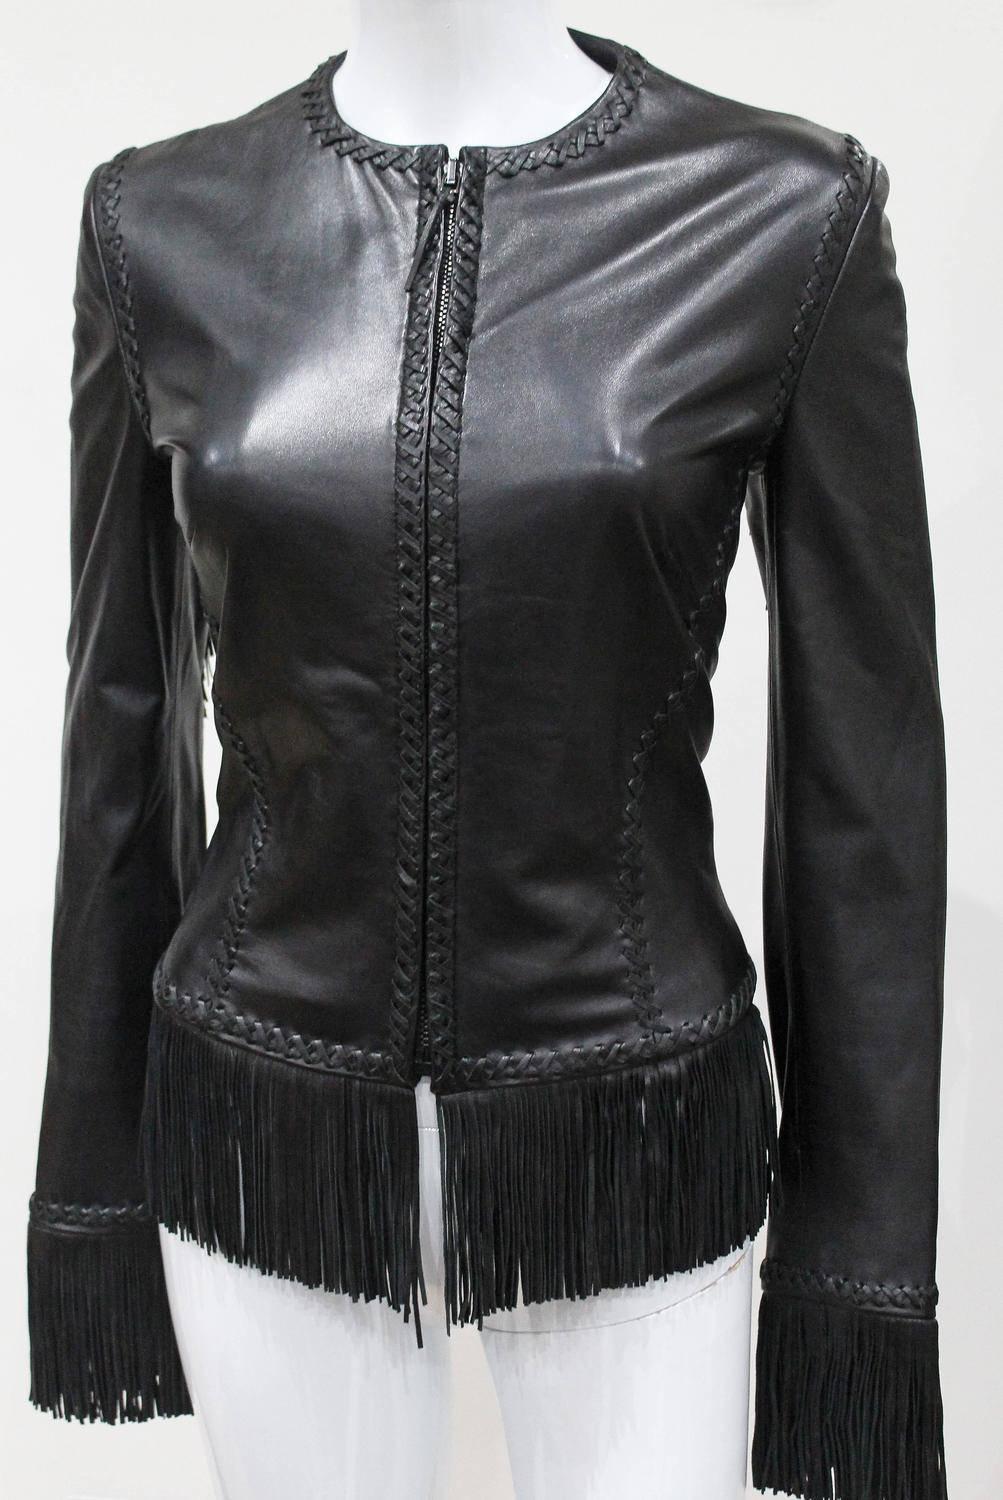 A Gianni Versace black lambskin leather bondage lace up jacket with leather fringing from the Spring/Summer 2002 collection. The seams are highlighted with leather braiding and the cuffs, sleeves and hem are highlighted with 4